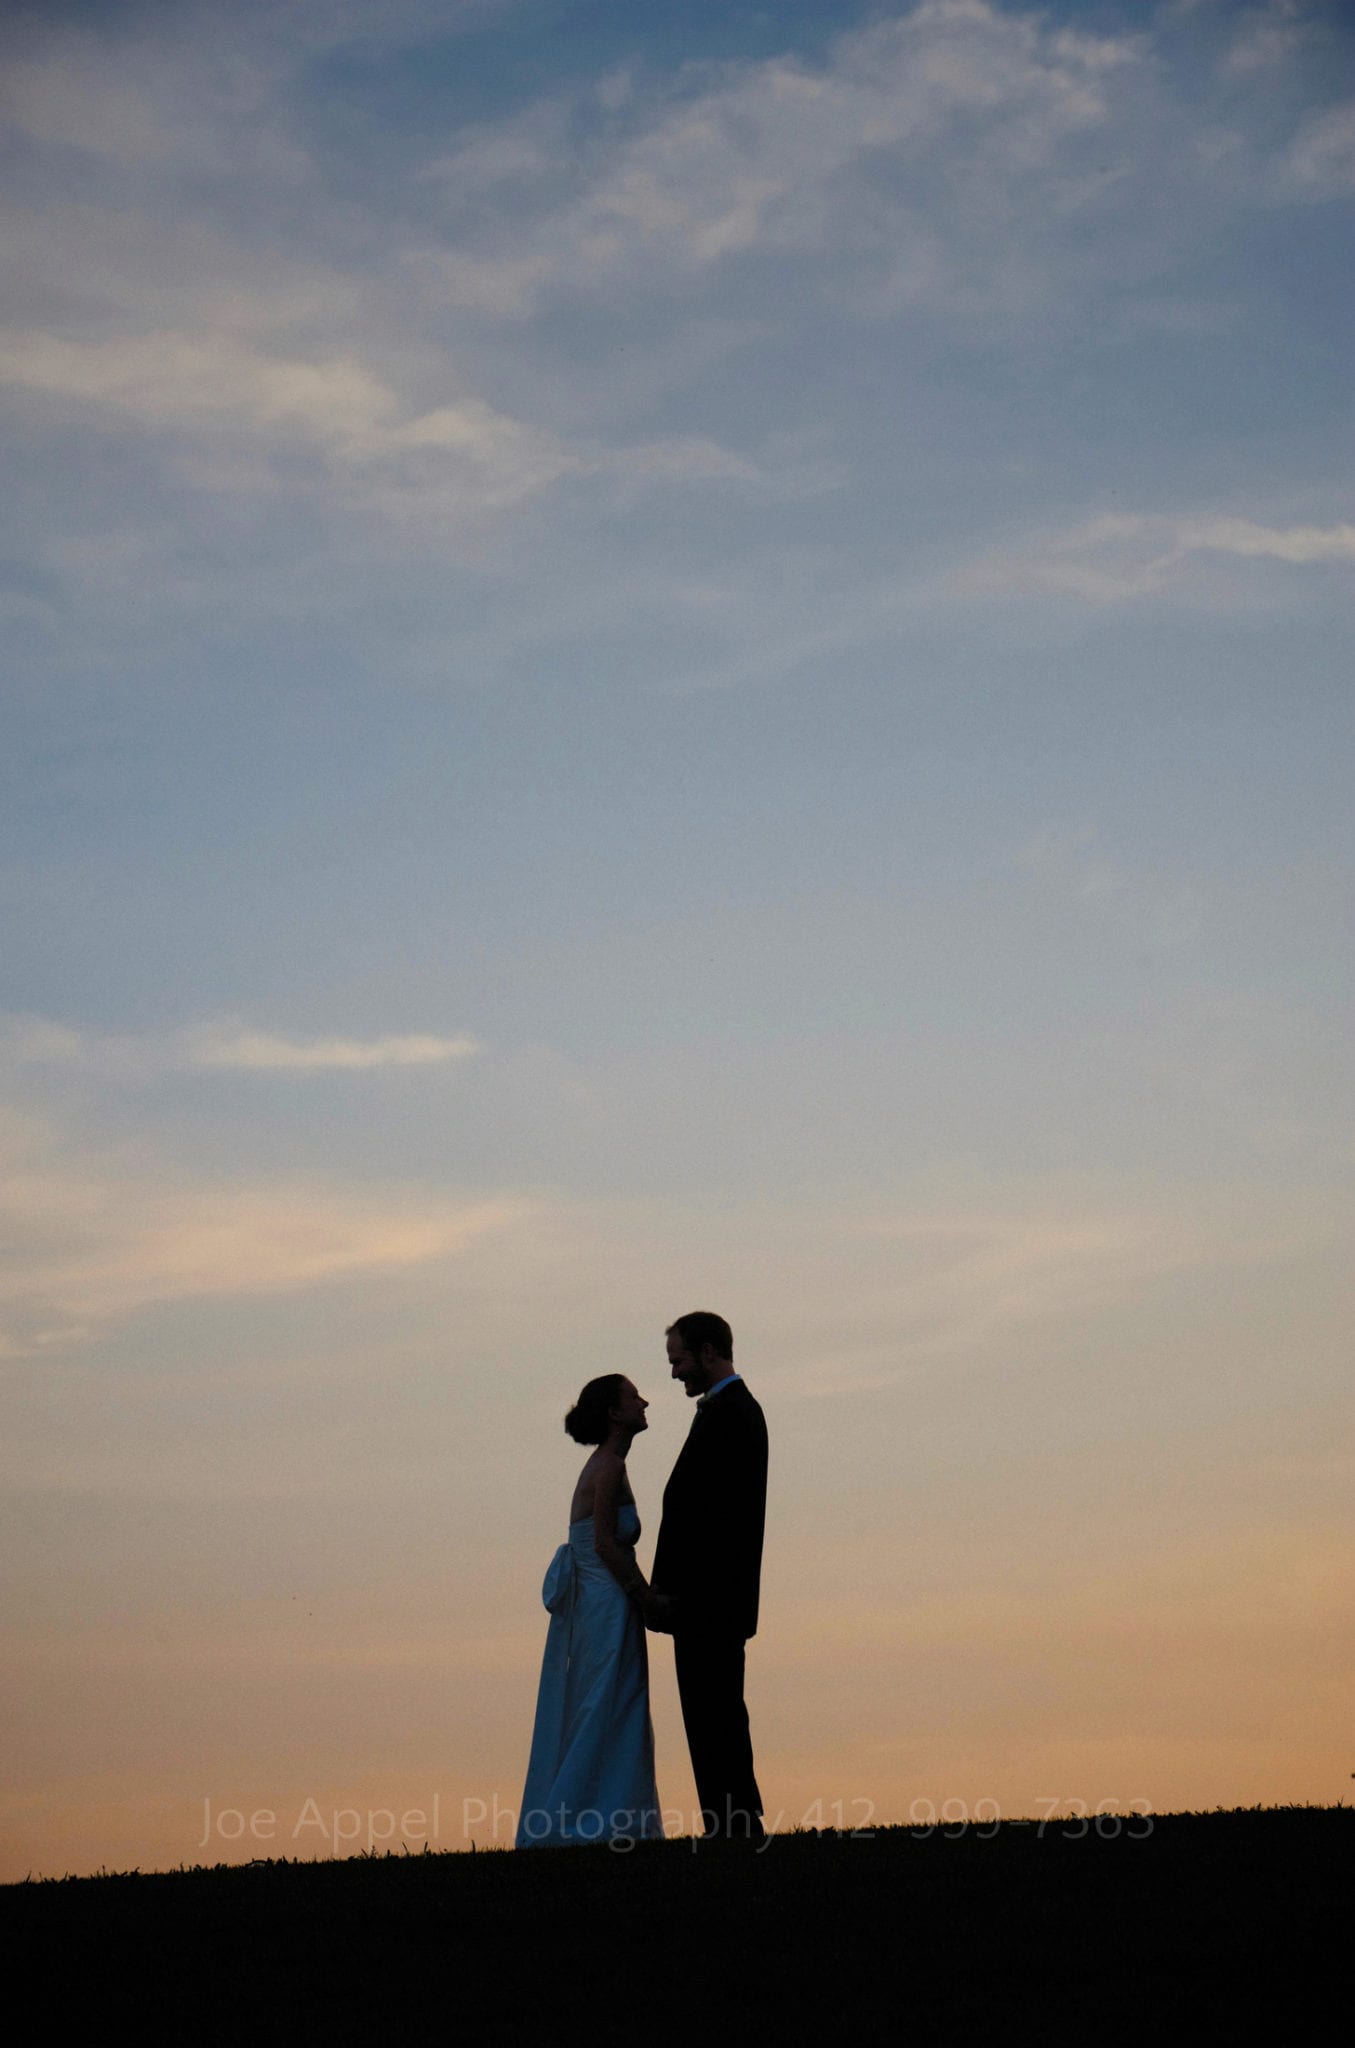 A silhouette of a bride and groom against the sunset at the top of a hill. Armstrong Farms Weddings